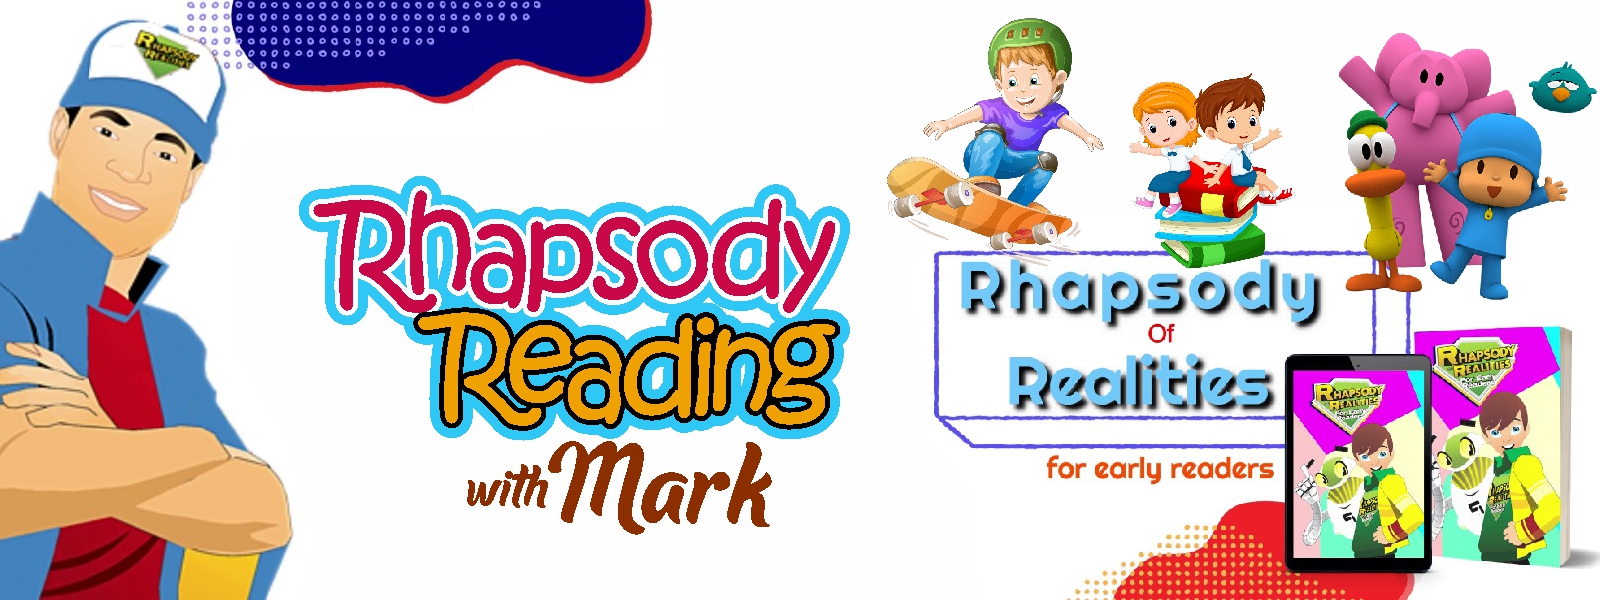 RHAPSODY READING FOR EARLY READERS WITH MARK